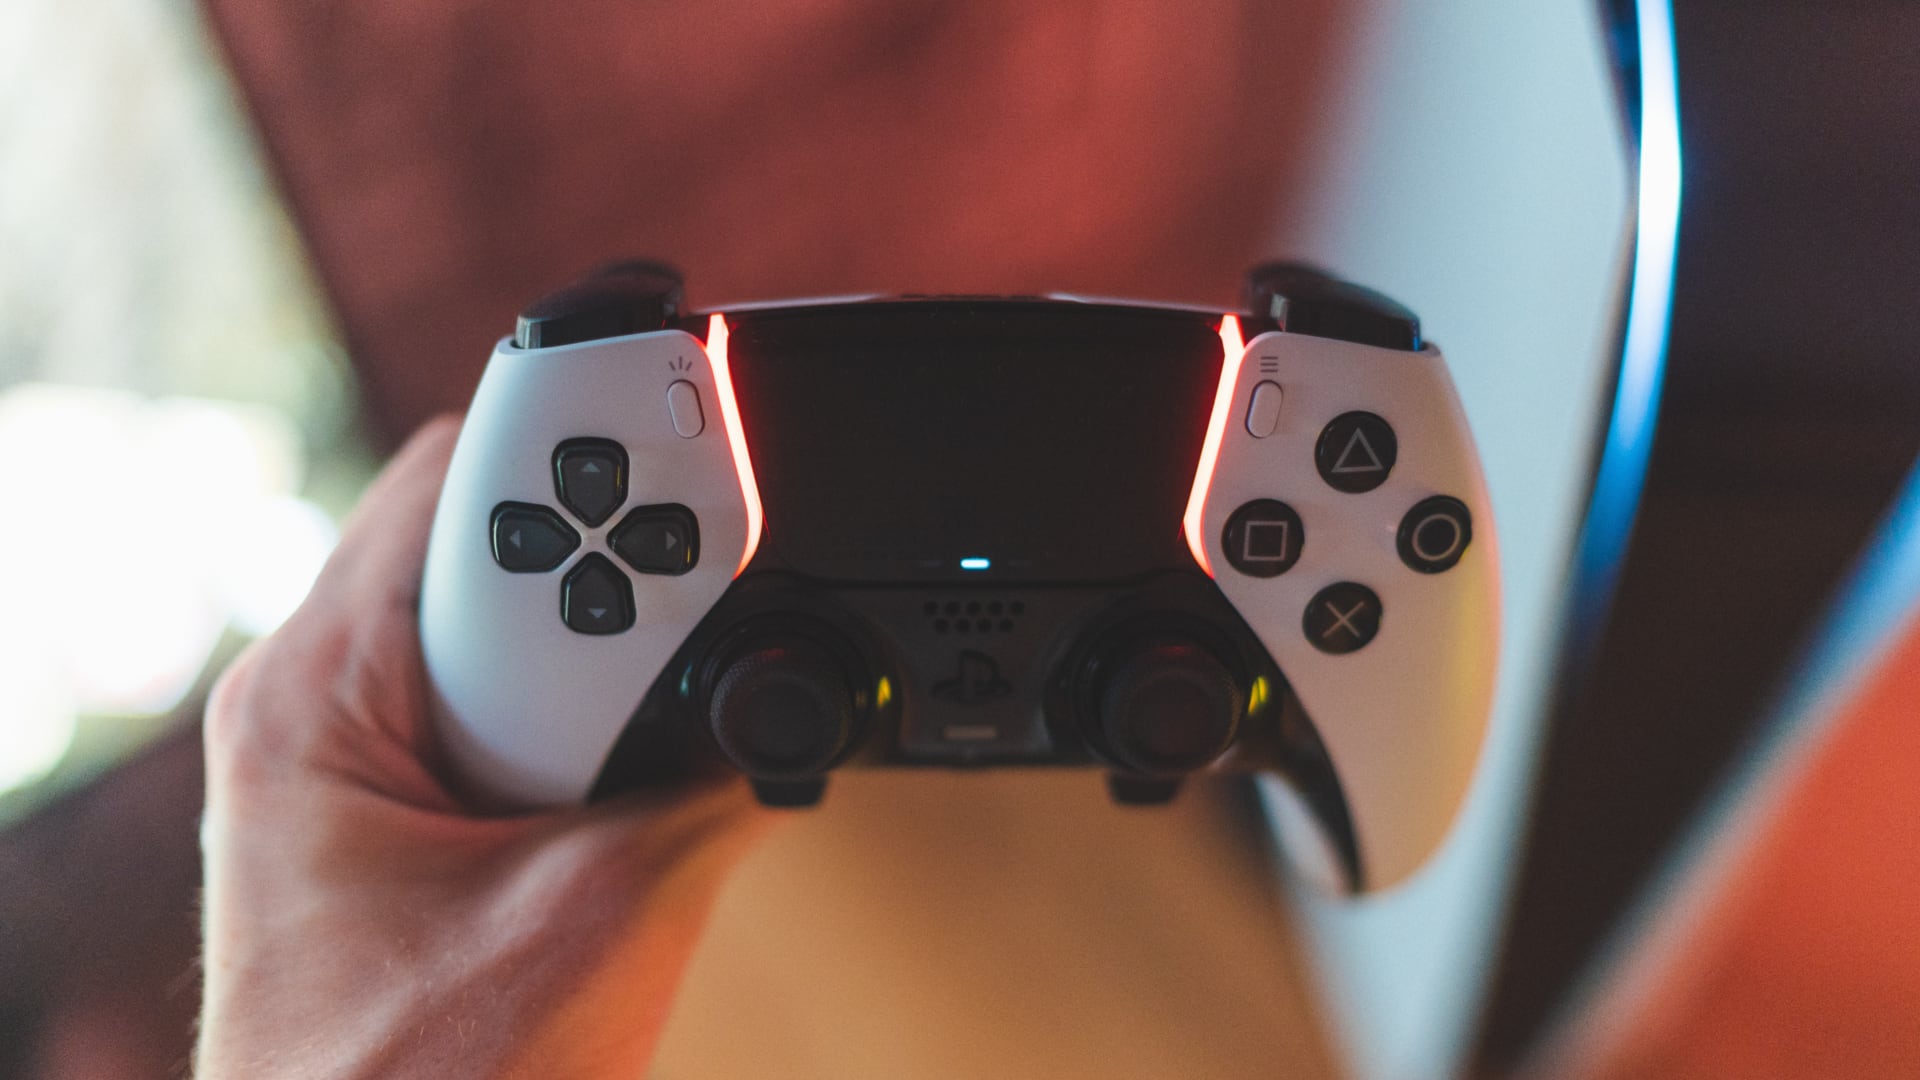 Sony's DualSense Edge controller in a person's hand, set against a blurred background 